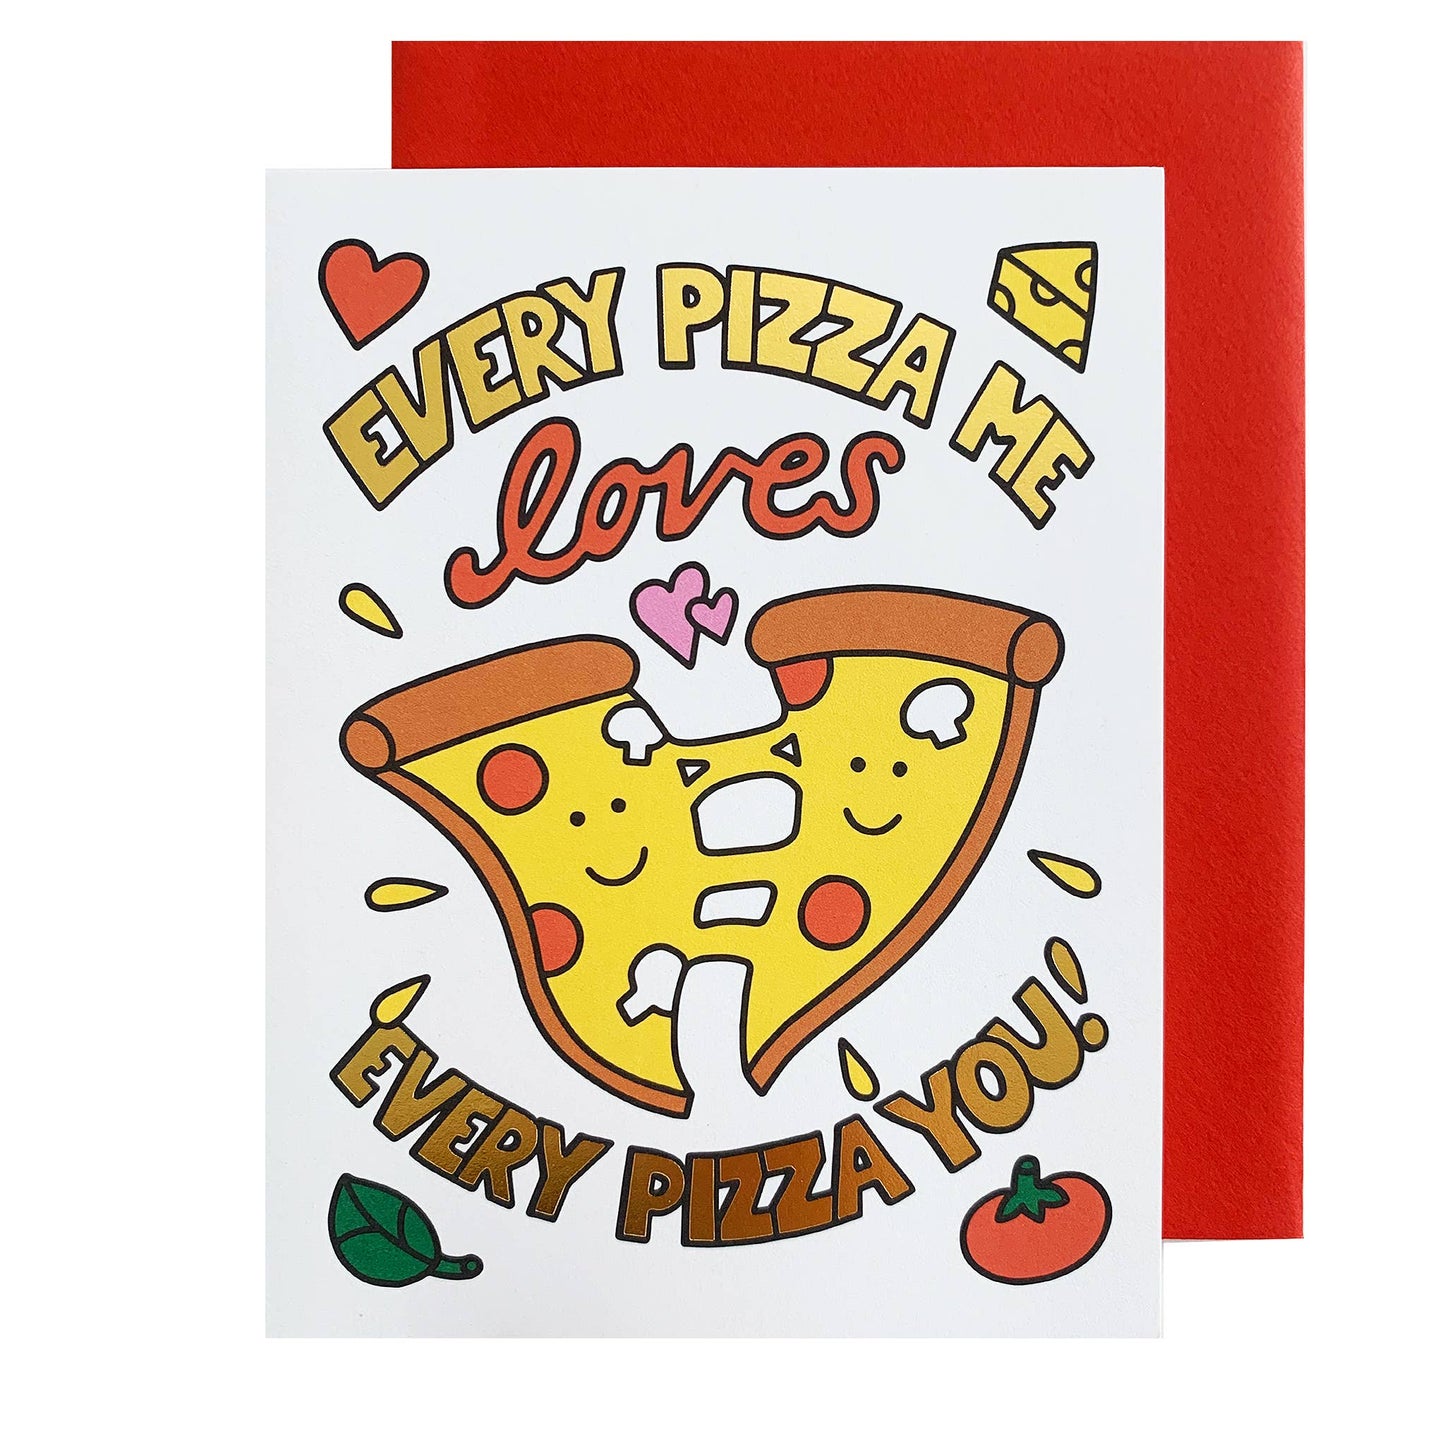 Card that reads" Every PIzza Me Loves Every PIzza You!"